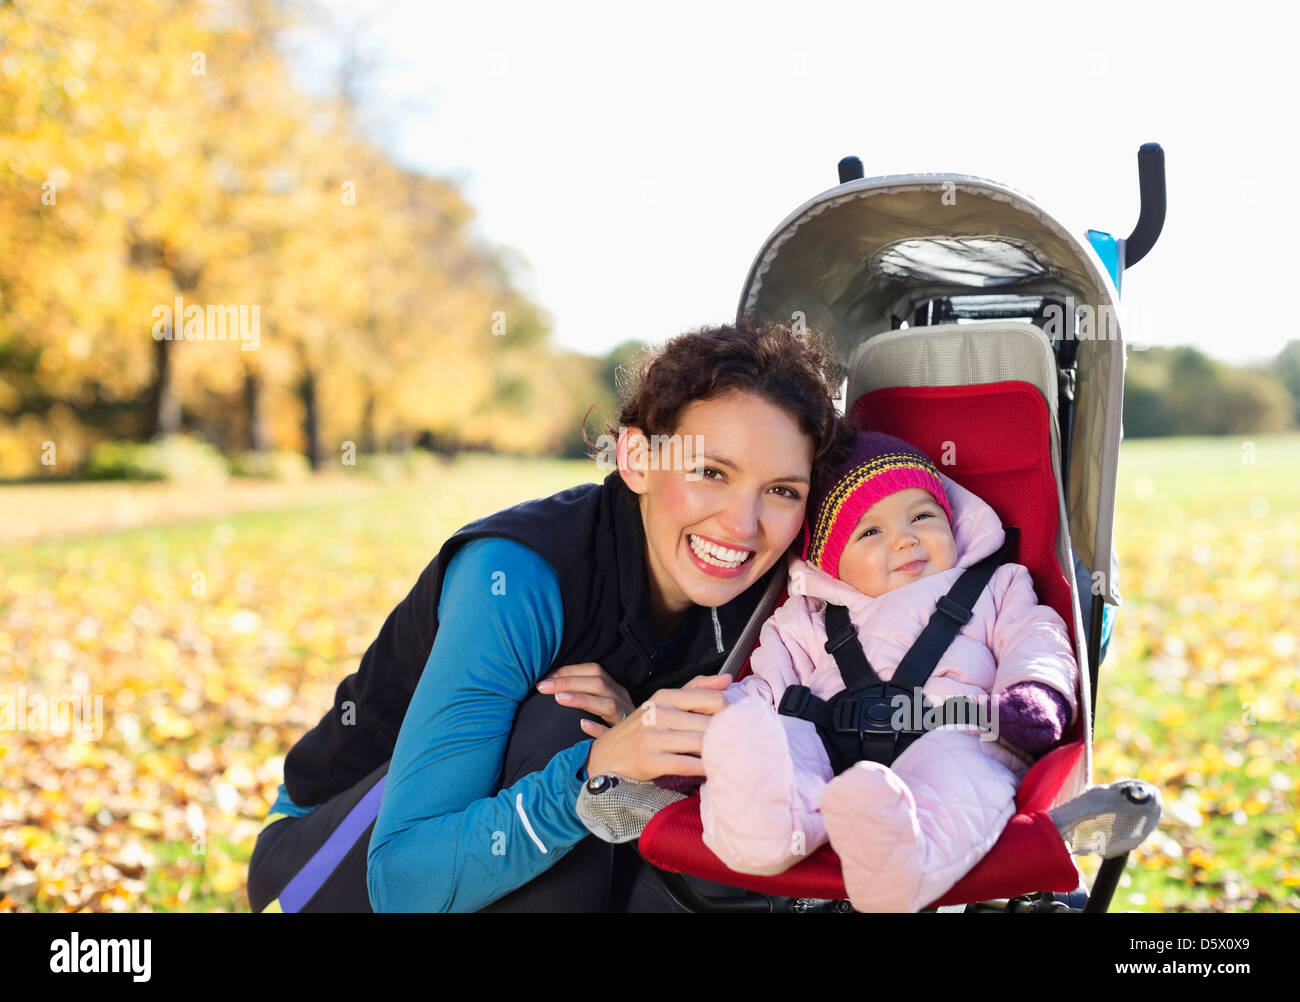 Woman smiling with baby in stroller Banque D'Images